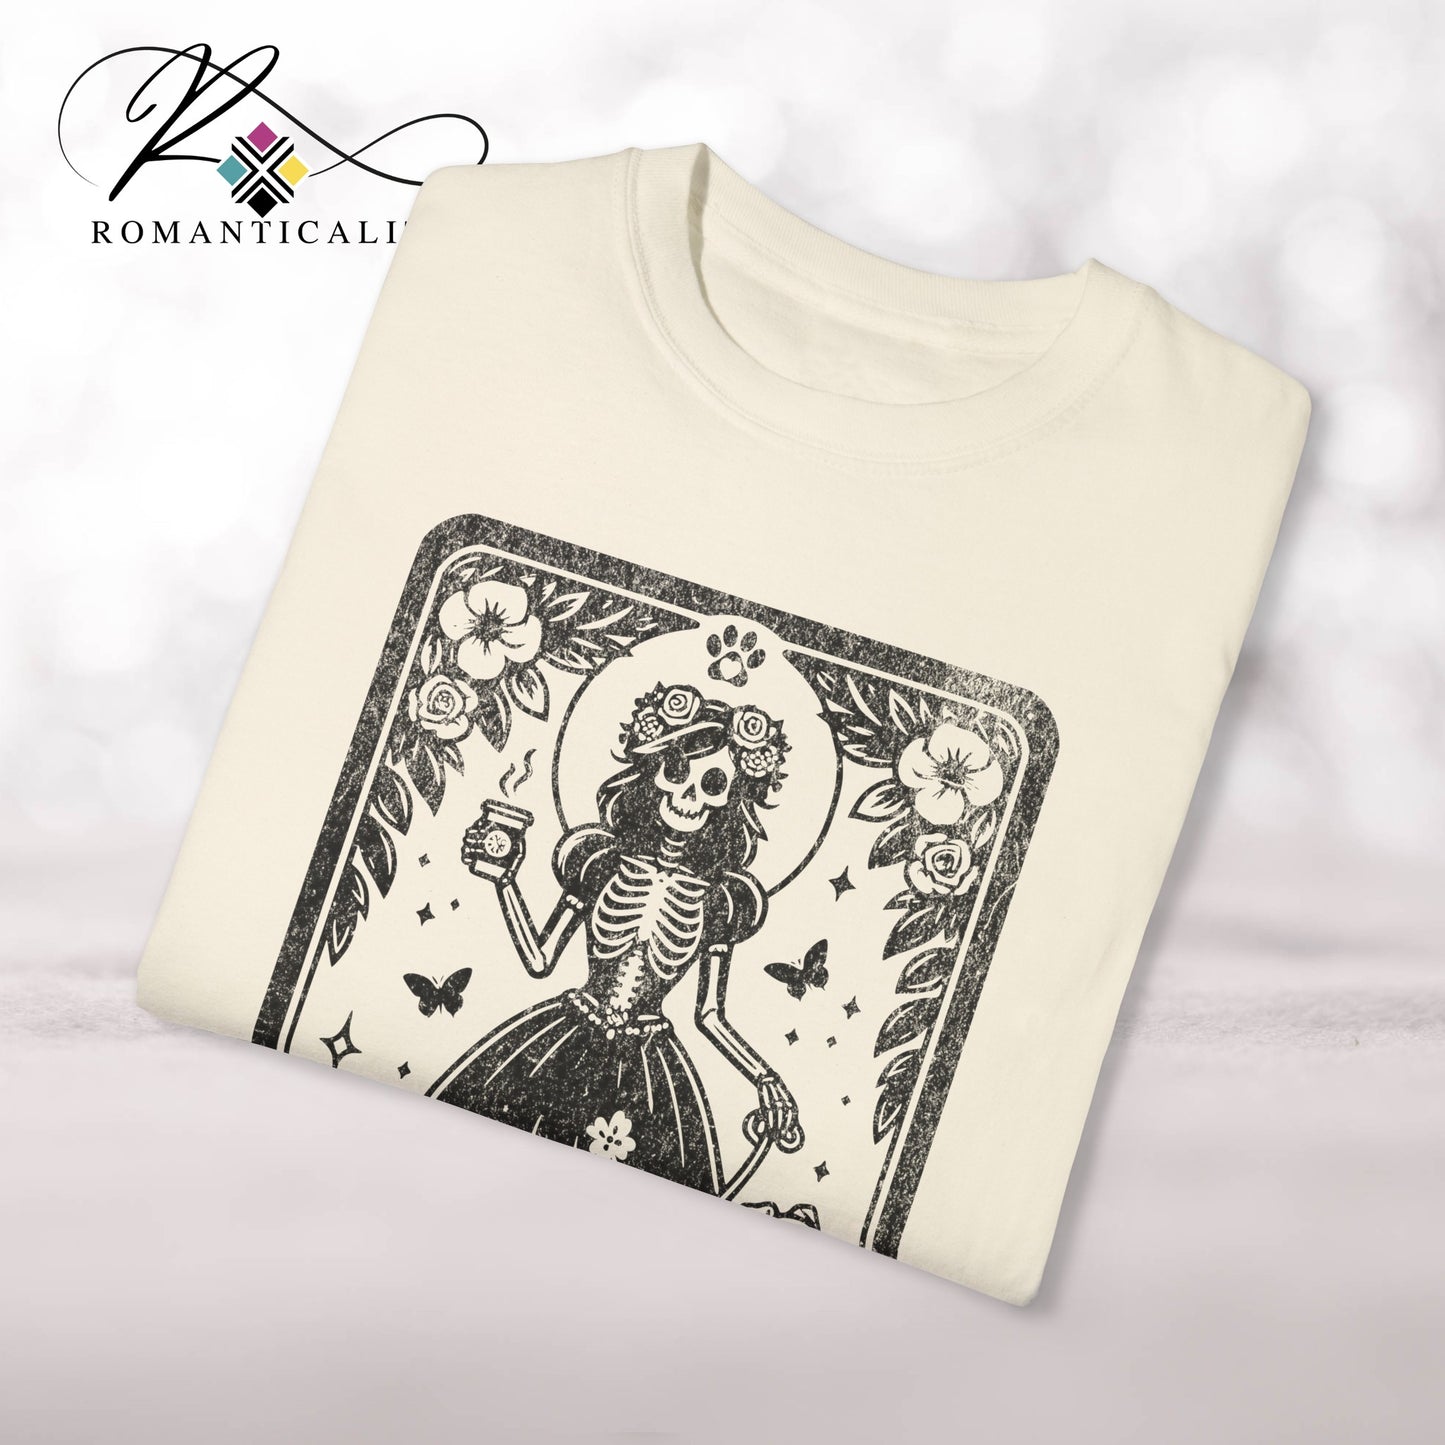 The DOG MAMA Tarot Card Graphic Tee-Women's T-Shirt-Mother's Day Gift-Giftful- Tarot Card Graphic T-shirt-Themed Top